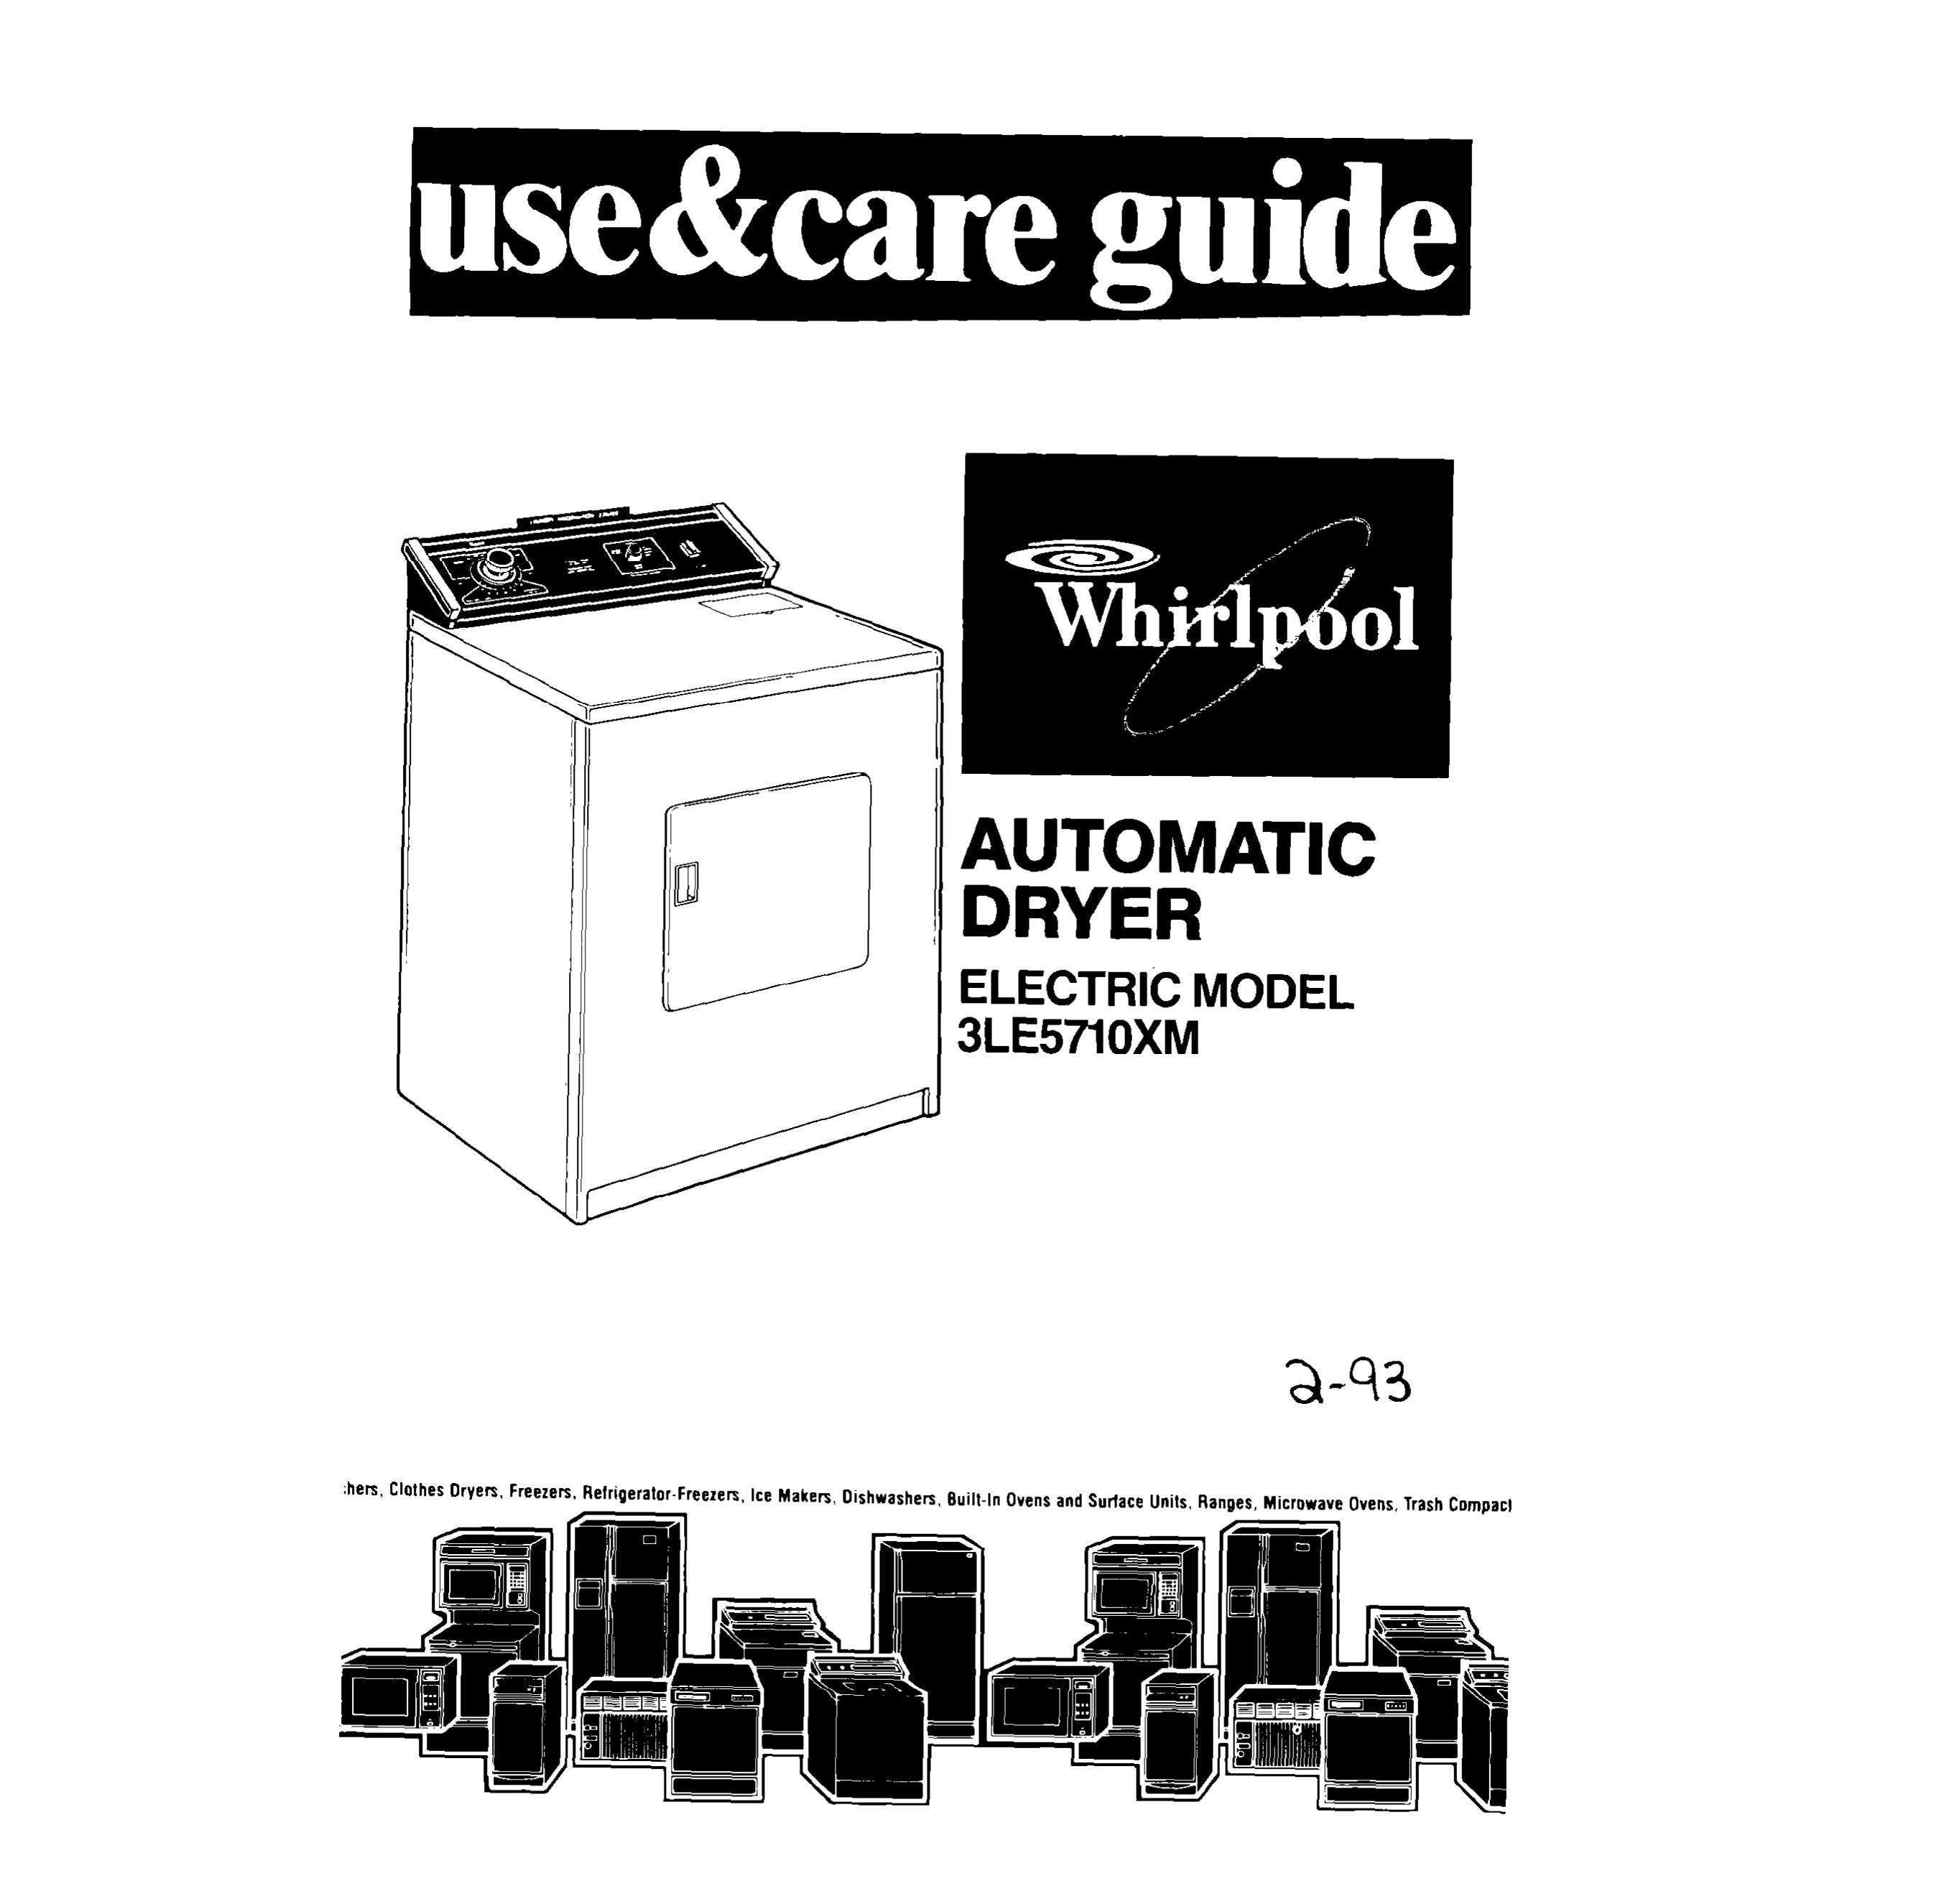 Whirlpool 3LE5710XM Washer/Dryer User Manual